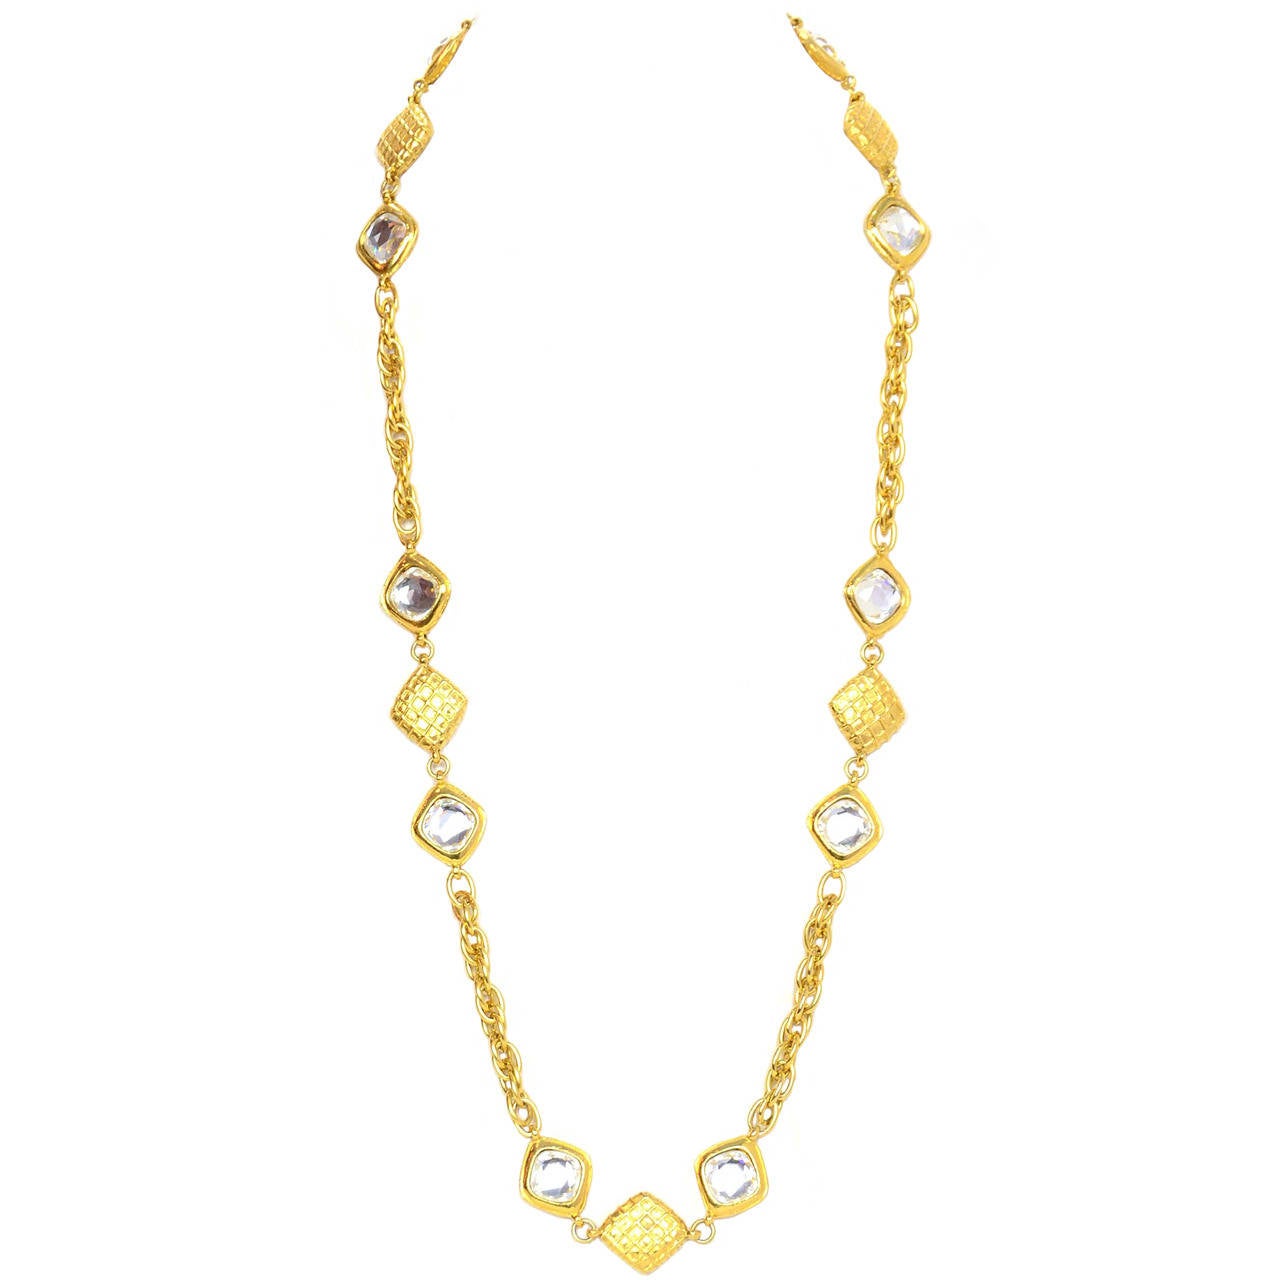 CHANEL Vintage 70's/80's Goldtone Quilted Diamond & Crystal Necklace